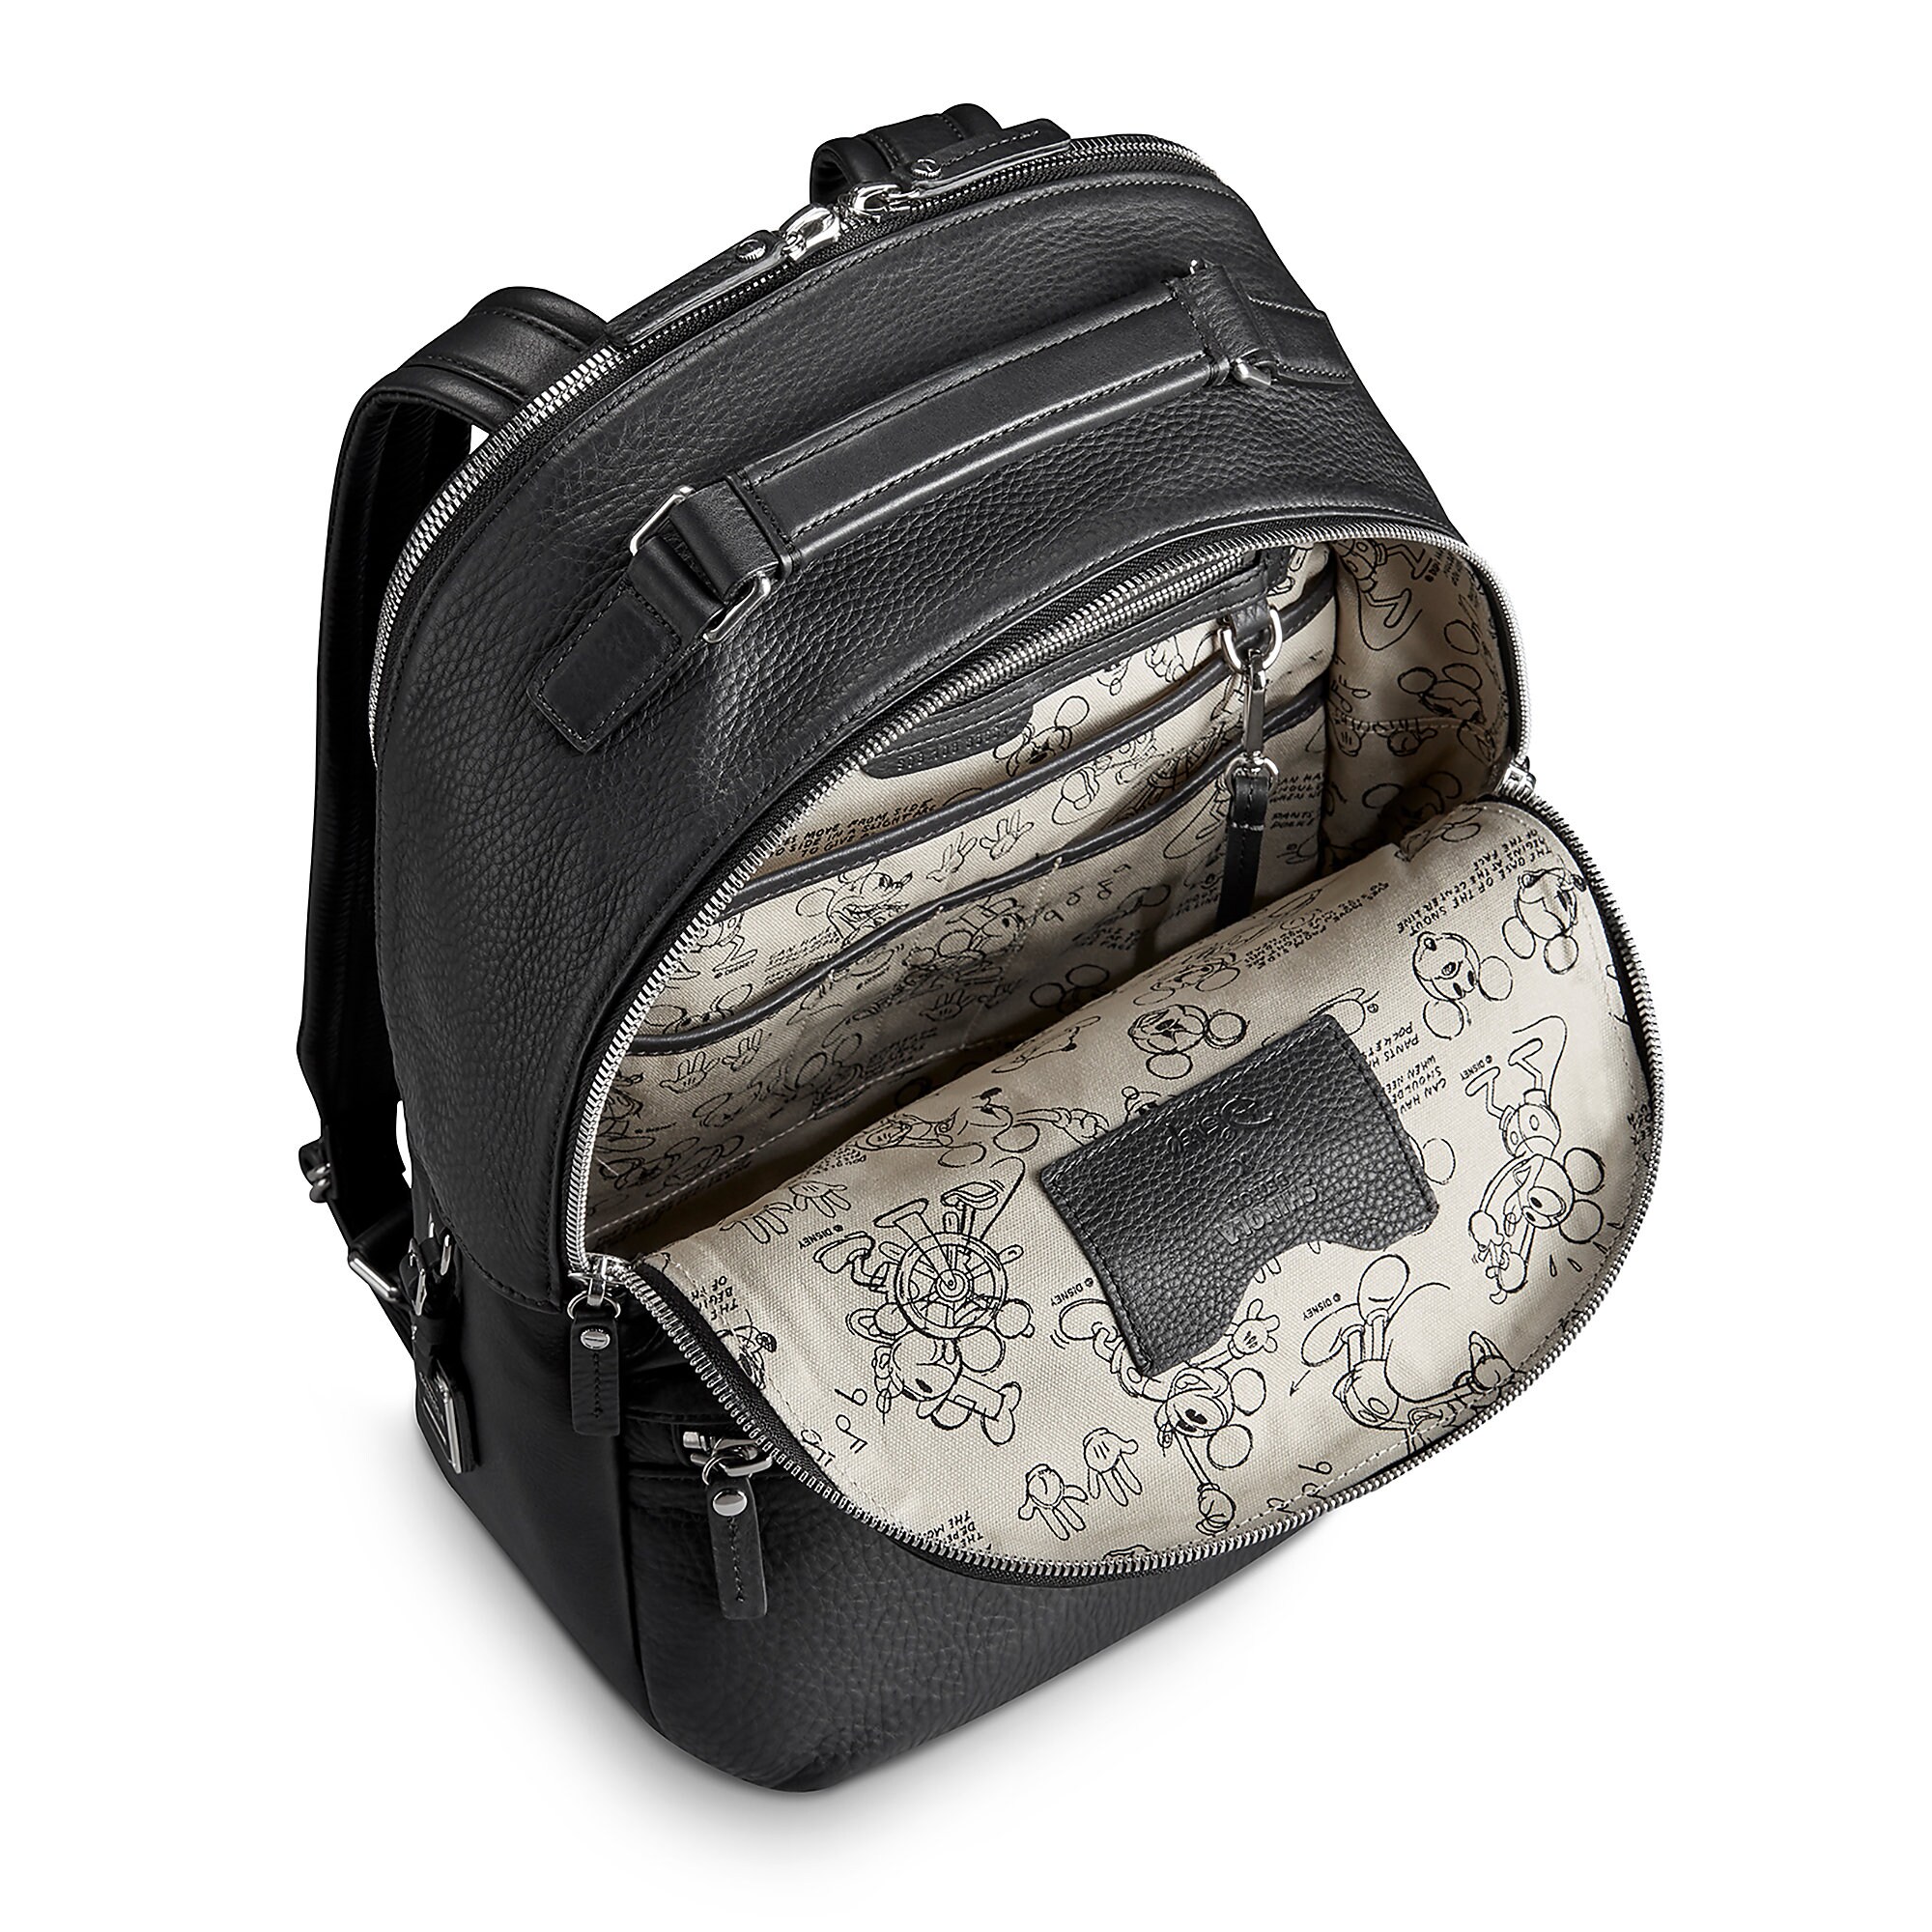 Mickey Mouse Steamboat Willie Leather Backpack by Shinola